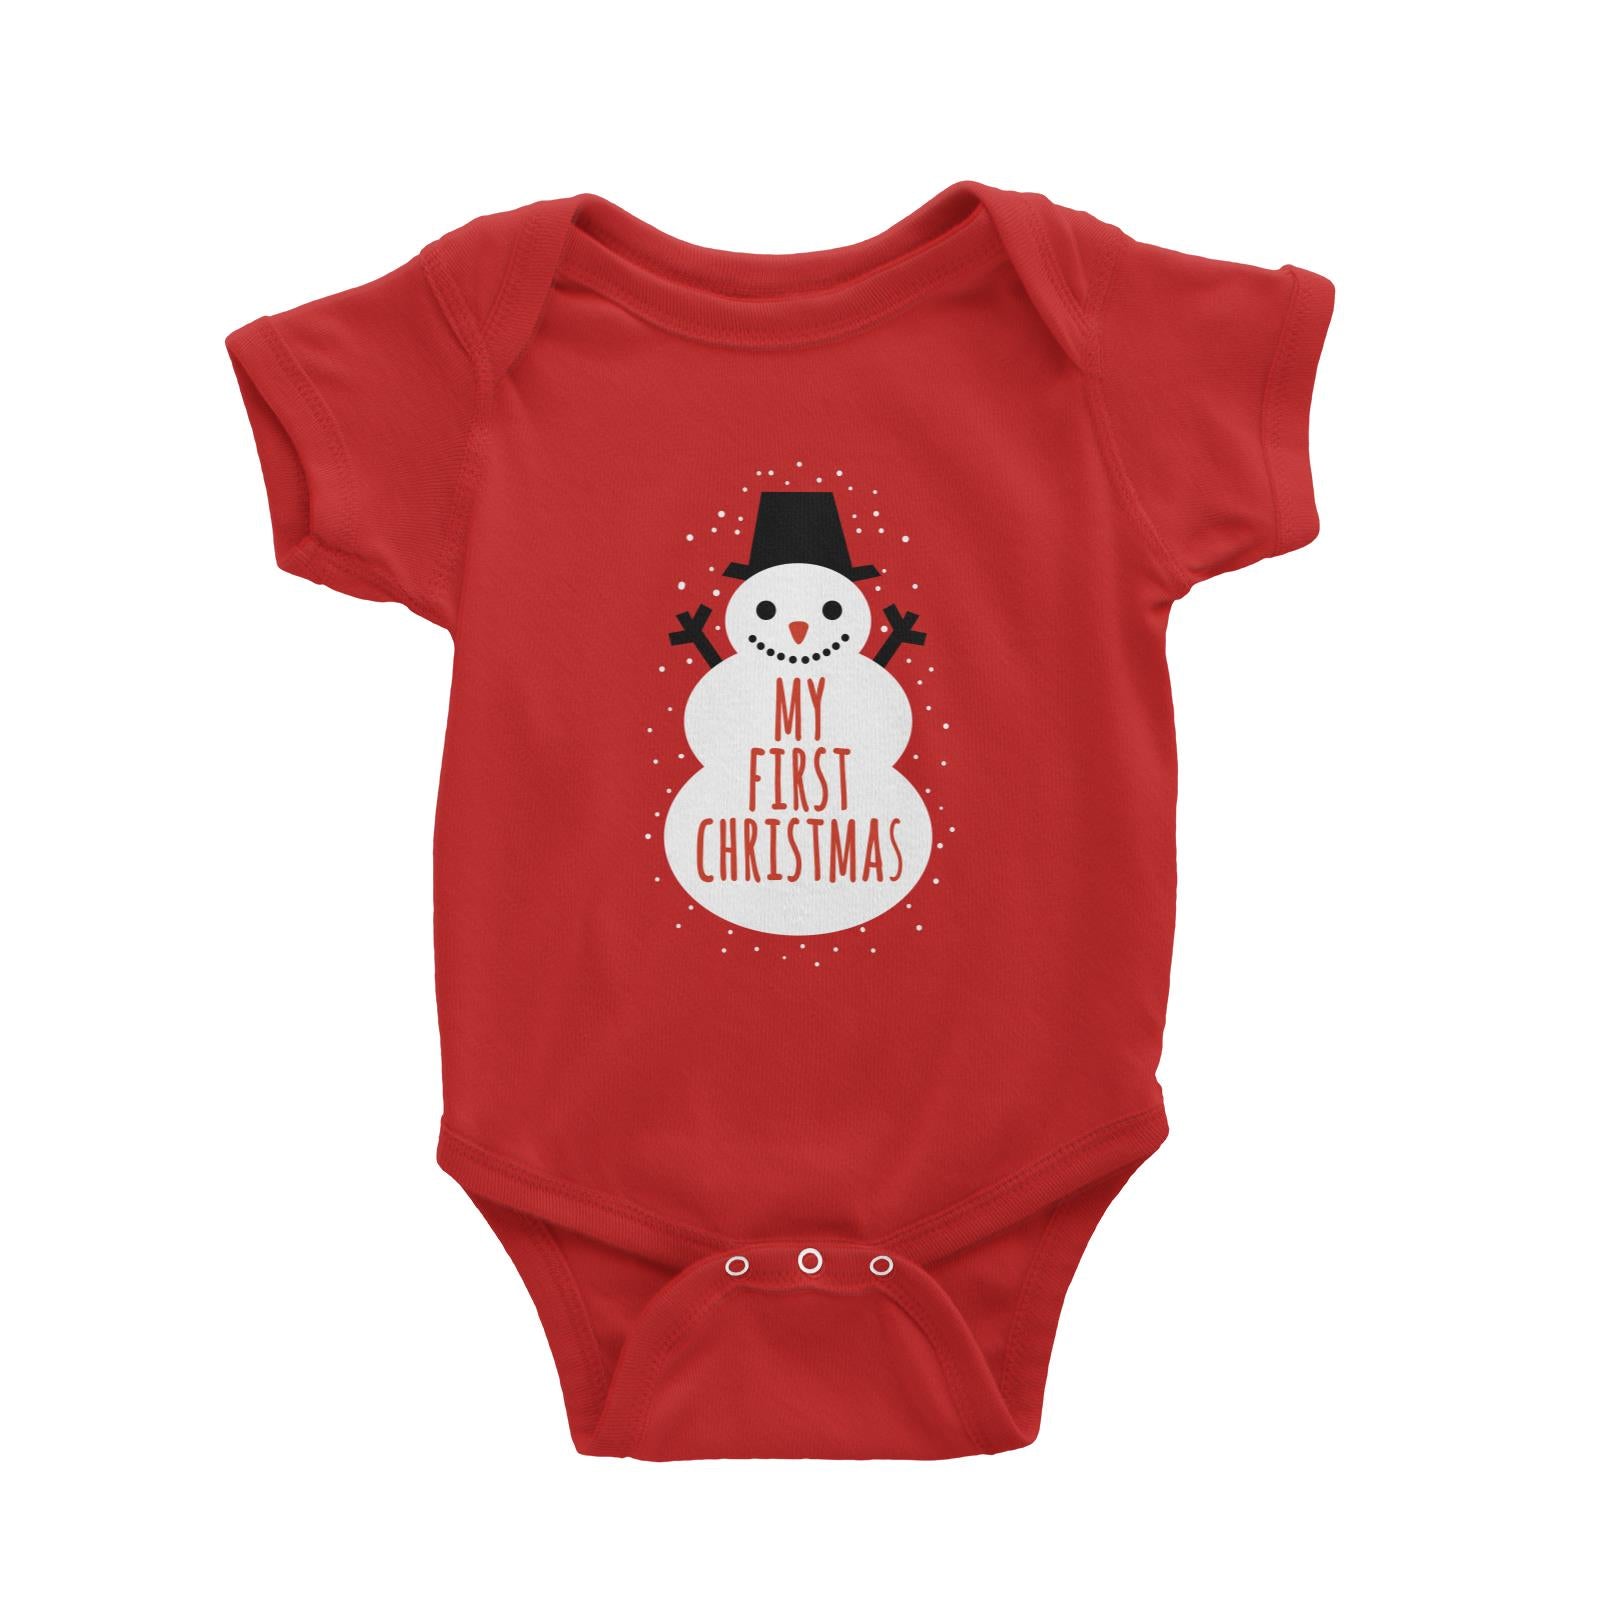 My First Christmas Snowman Baby Romper  Cute